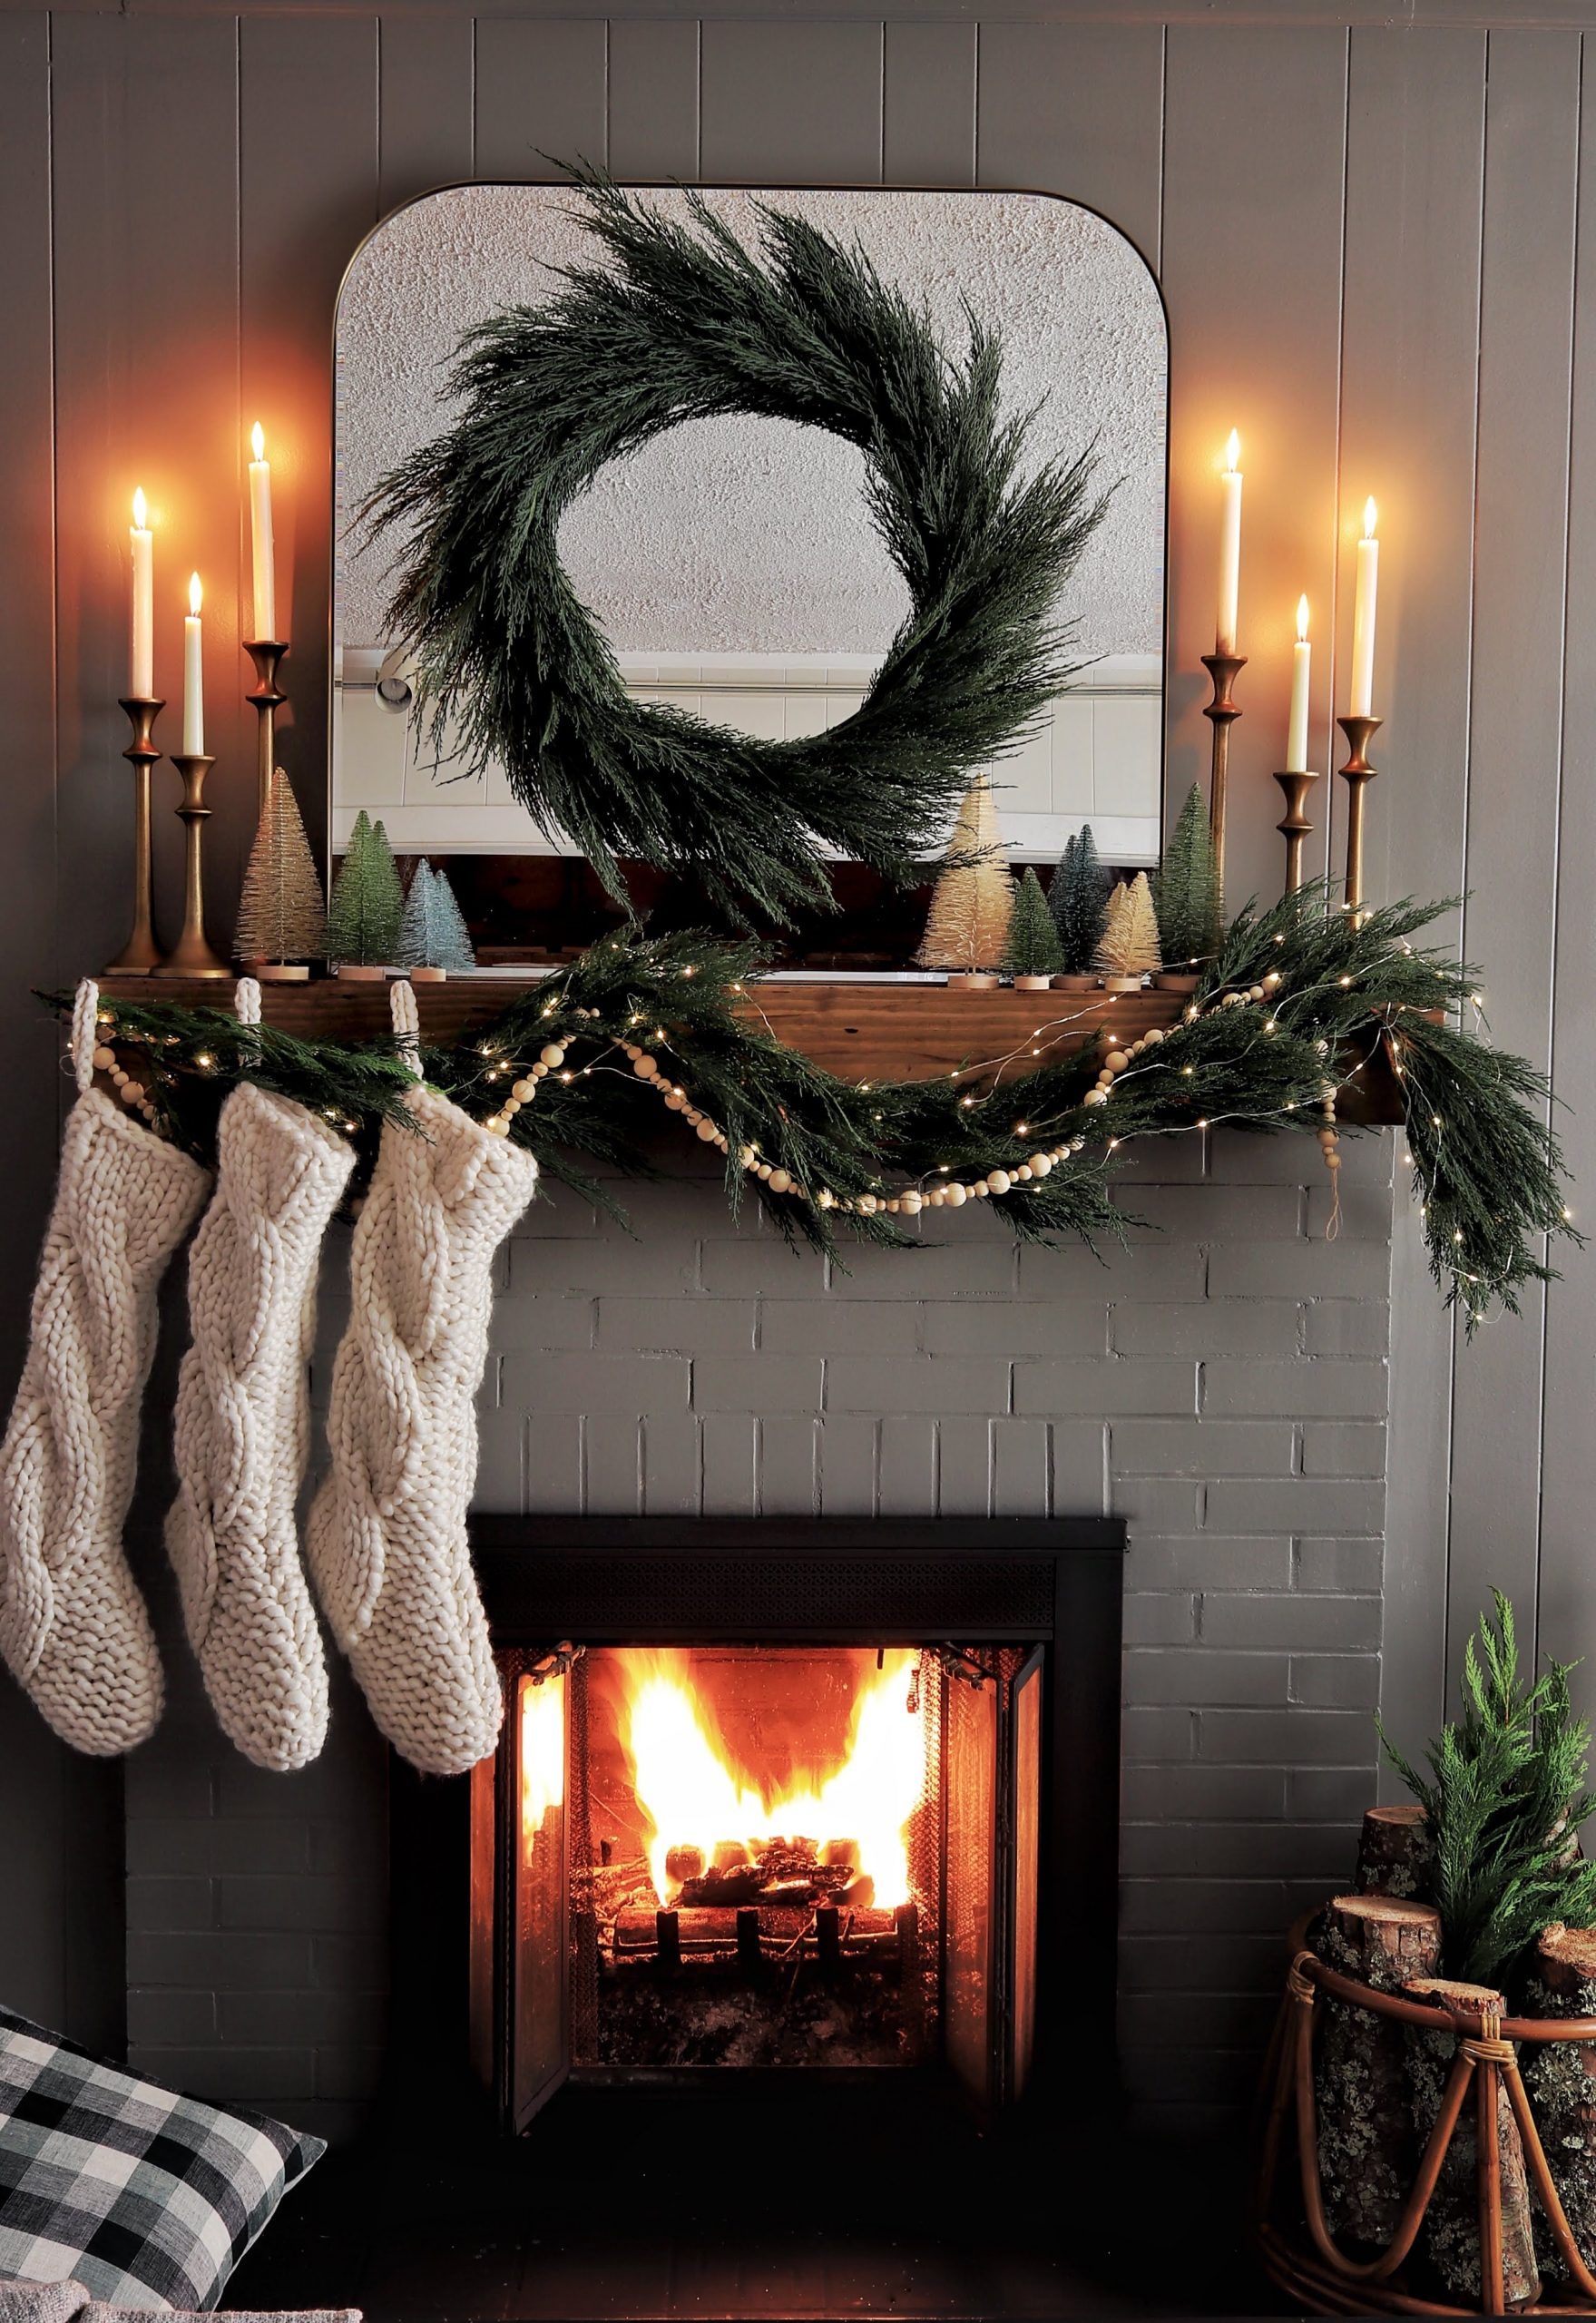 Decorate Your Mantel with Candles